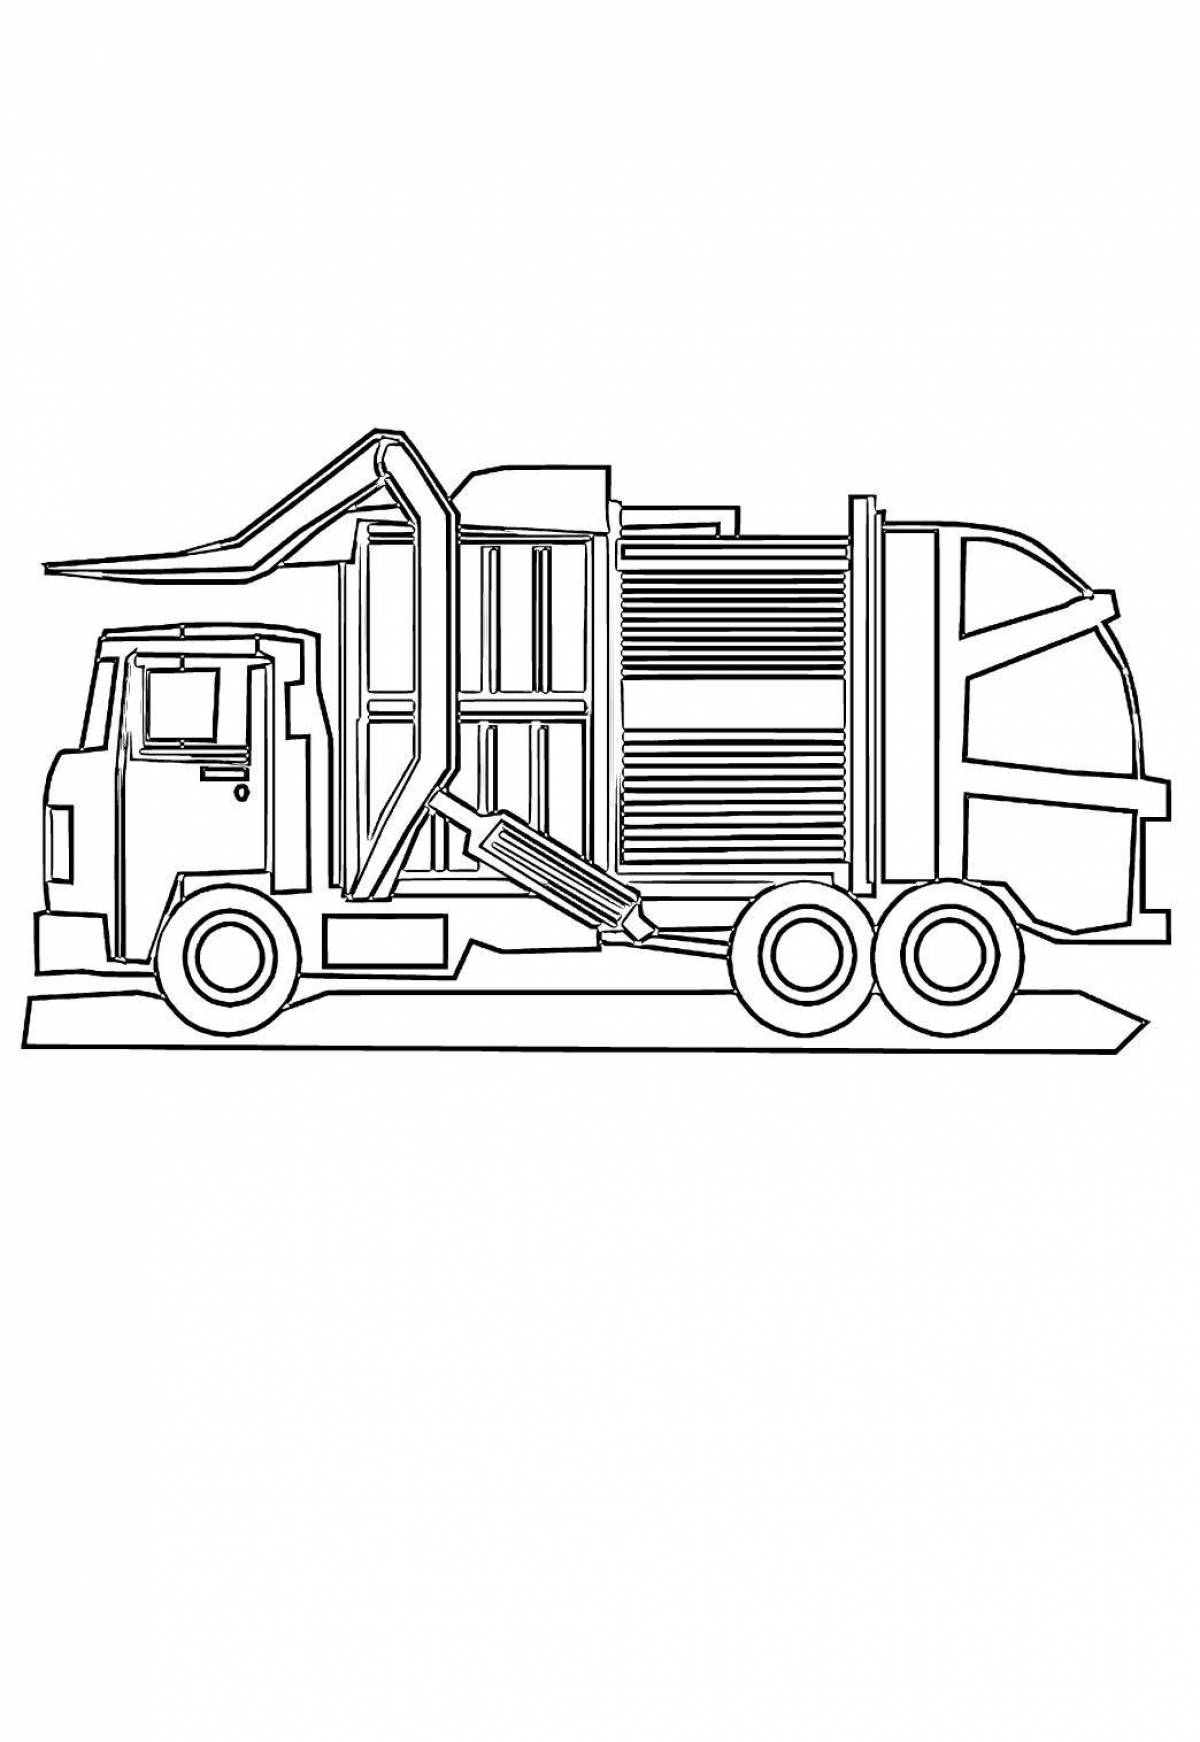 Cute garbage truck coloring page for 3-4 year olds